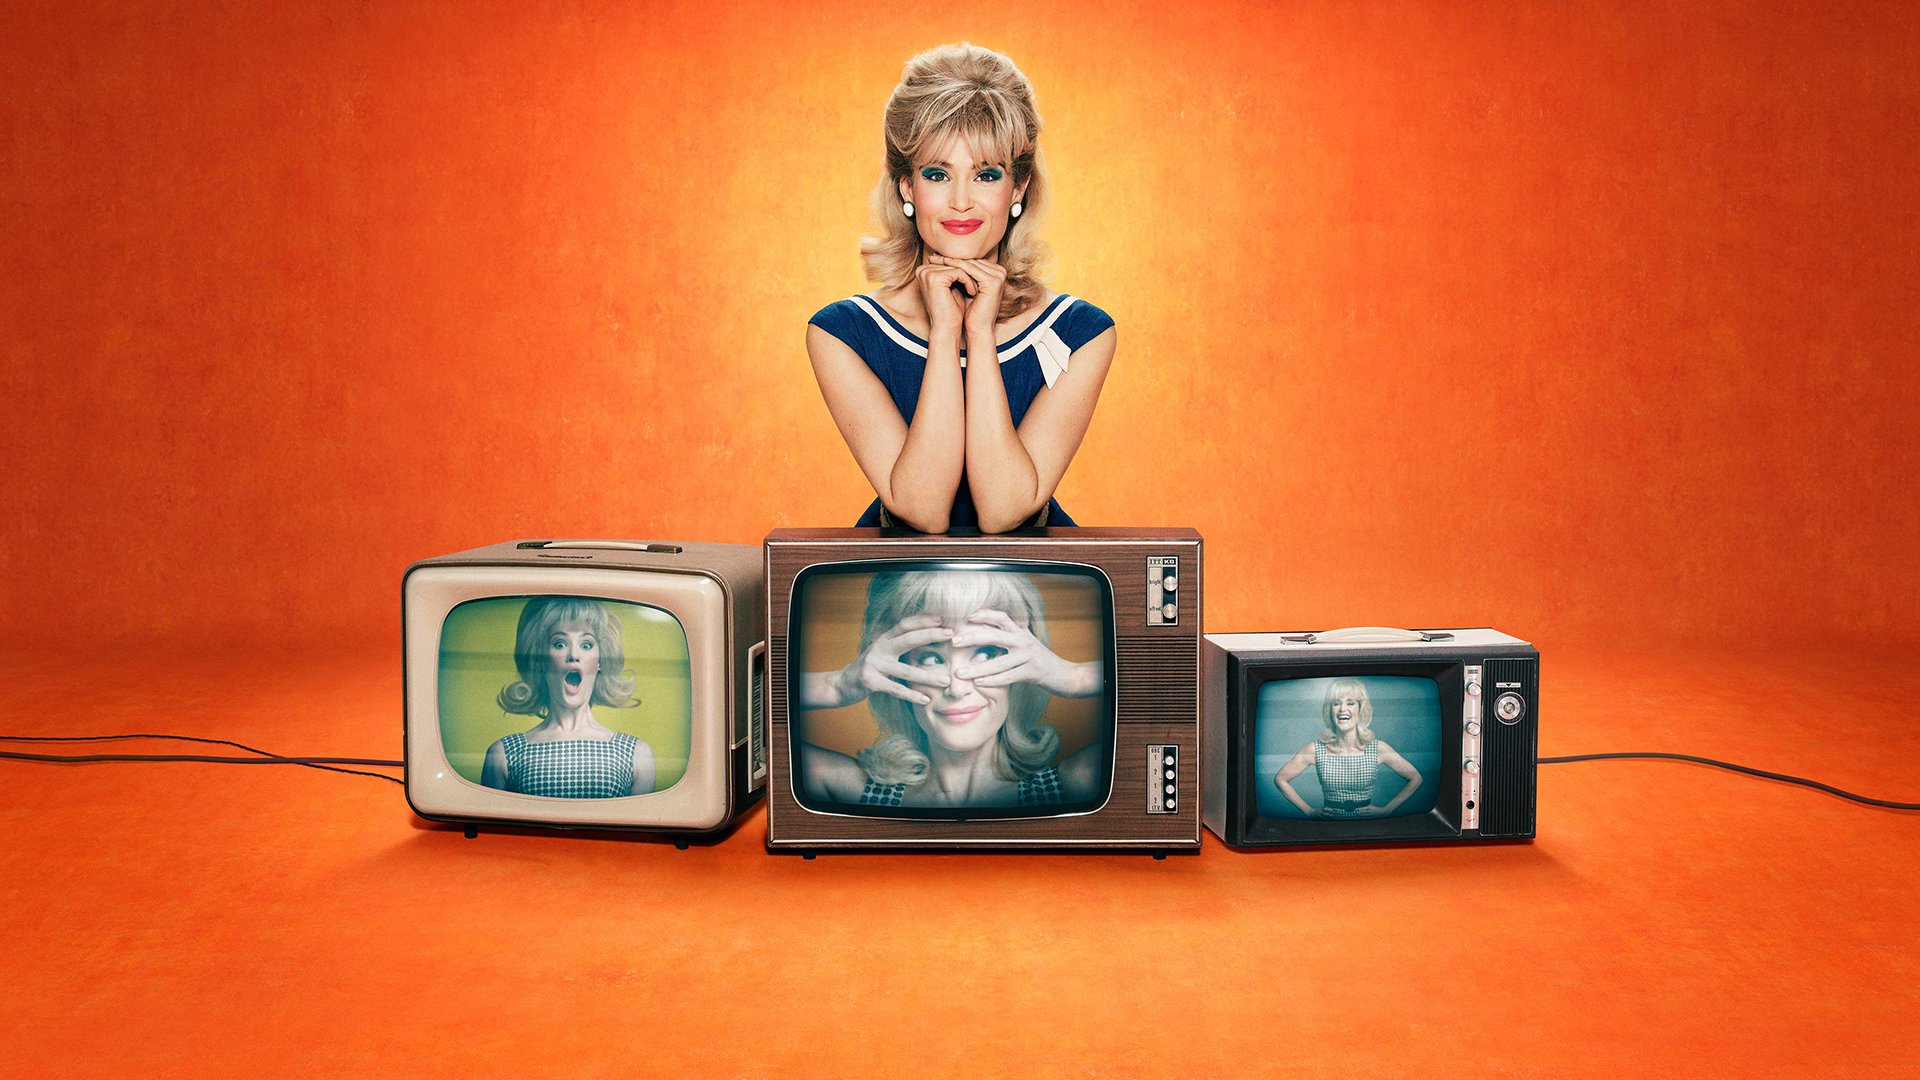 A blonde woman wearing red lipstick rests her chin on her hands while her elbows rest on top of a television screen featuring a still image of her face.